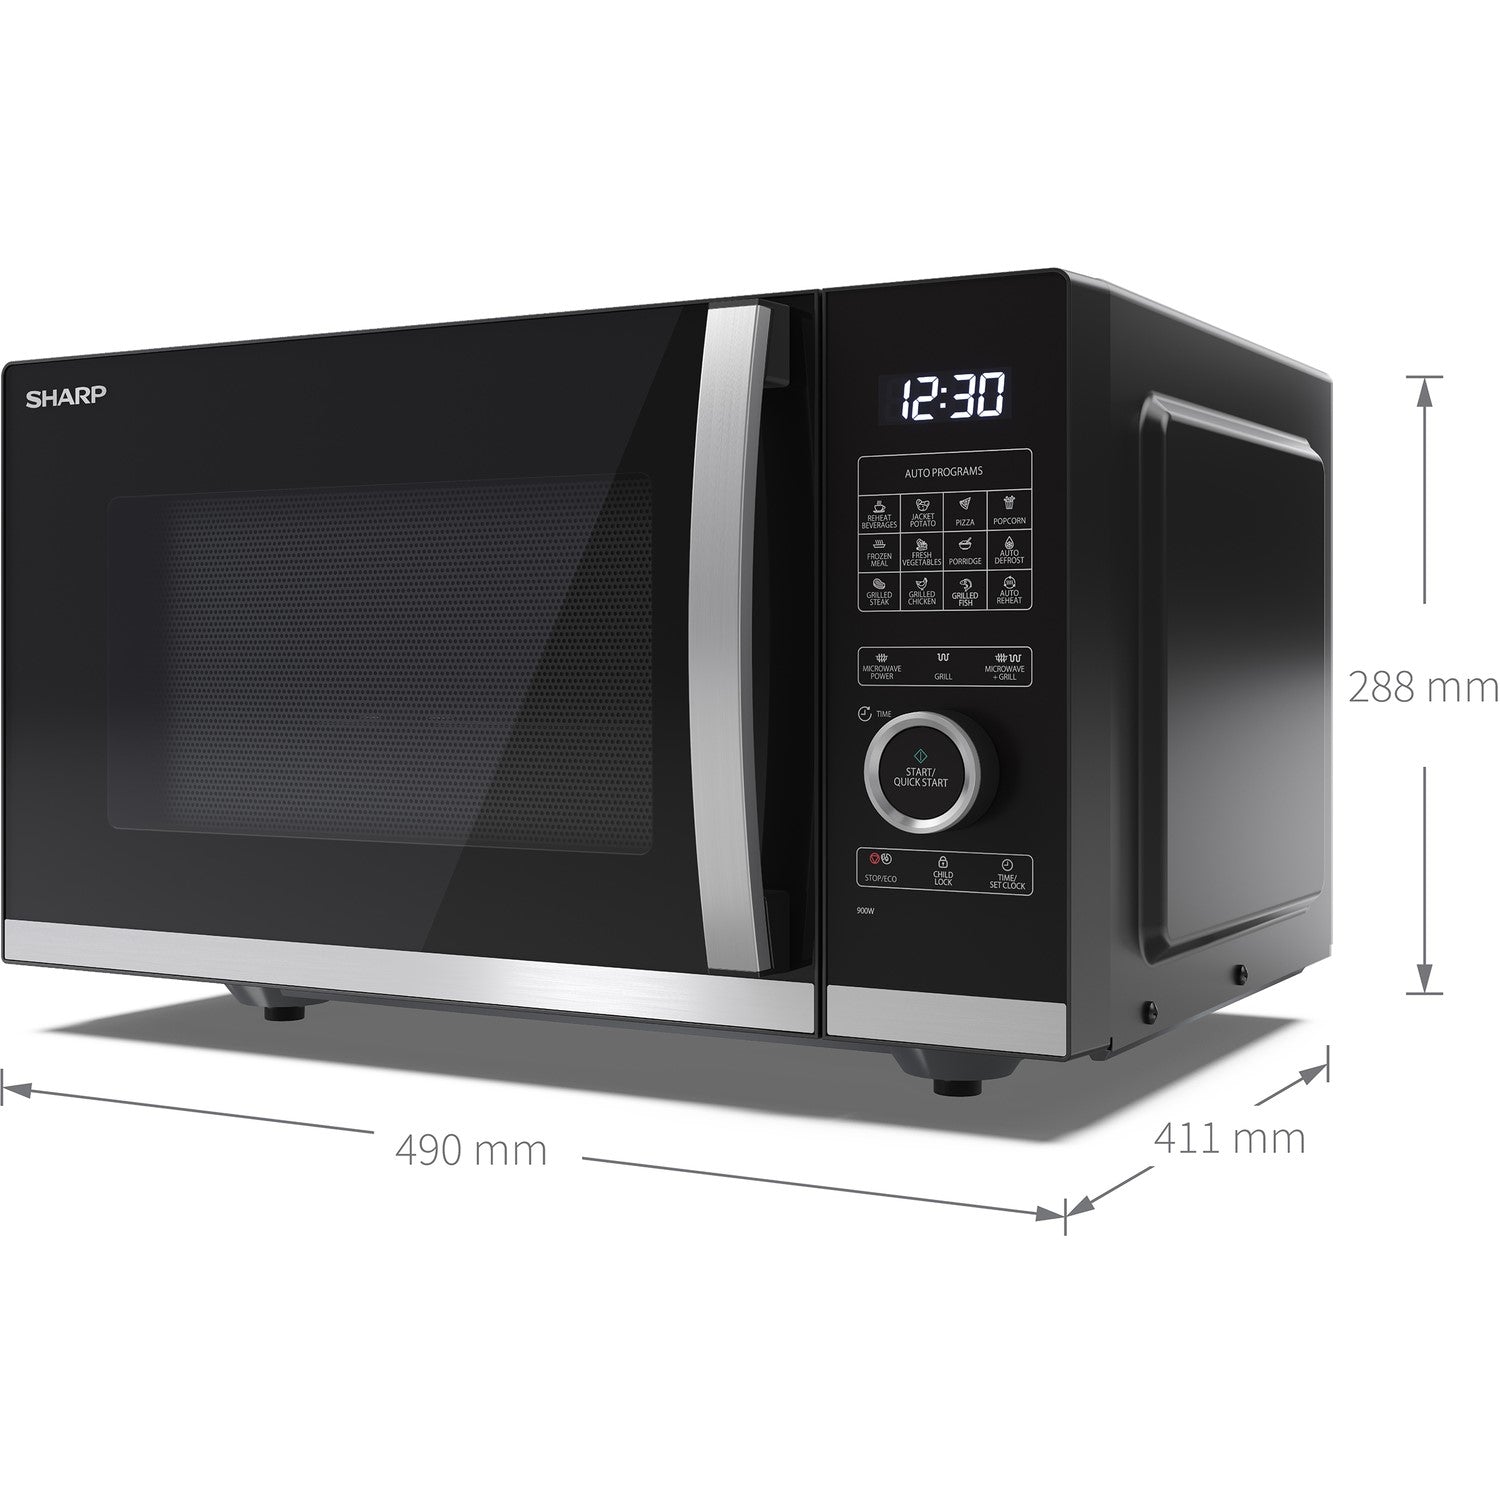 Sharp 25L Digital Flatbed Microwave with Grill - Black